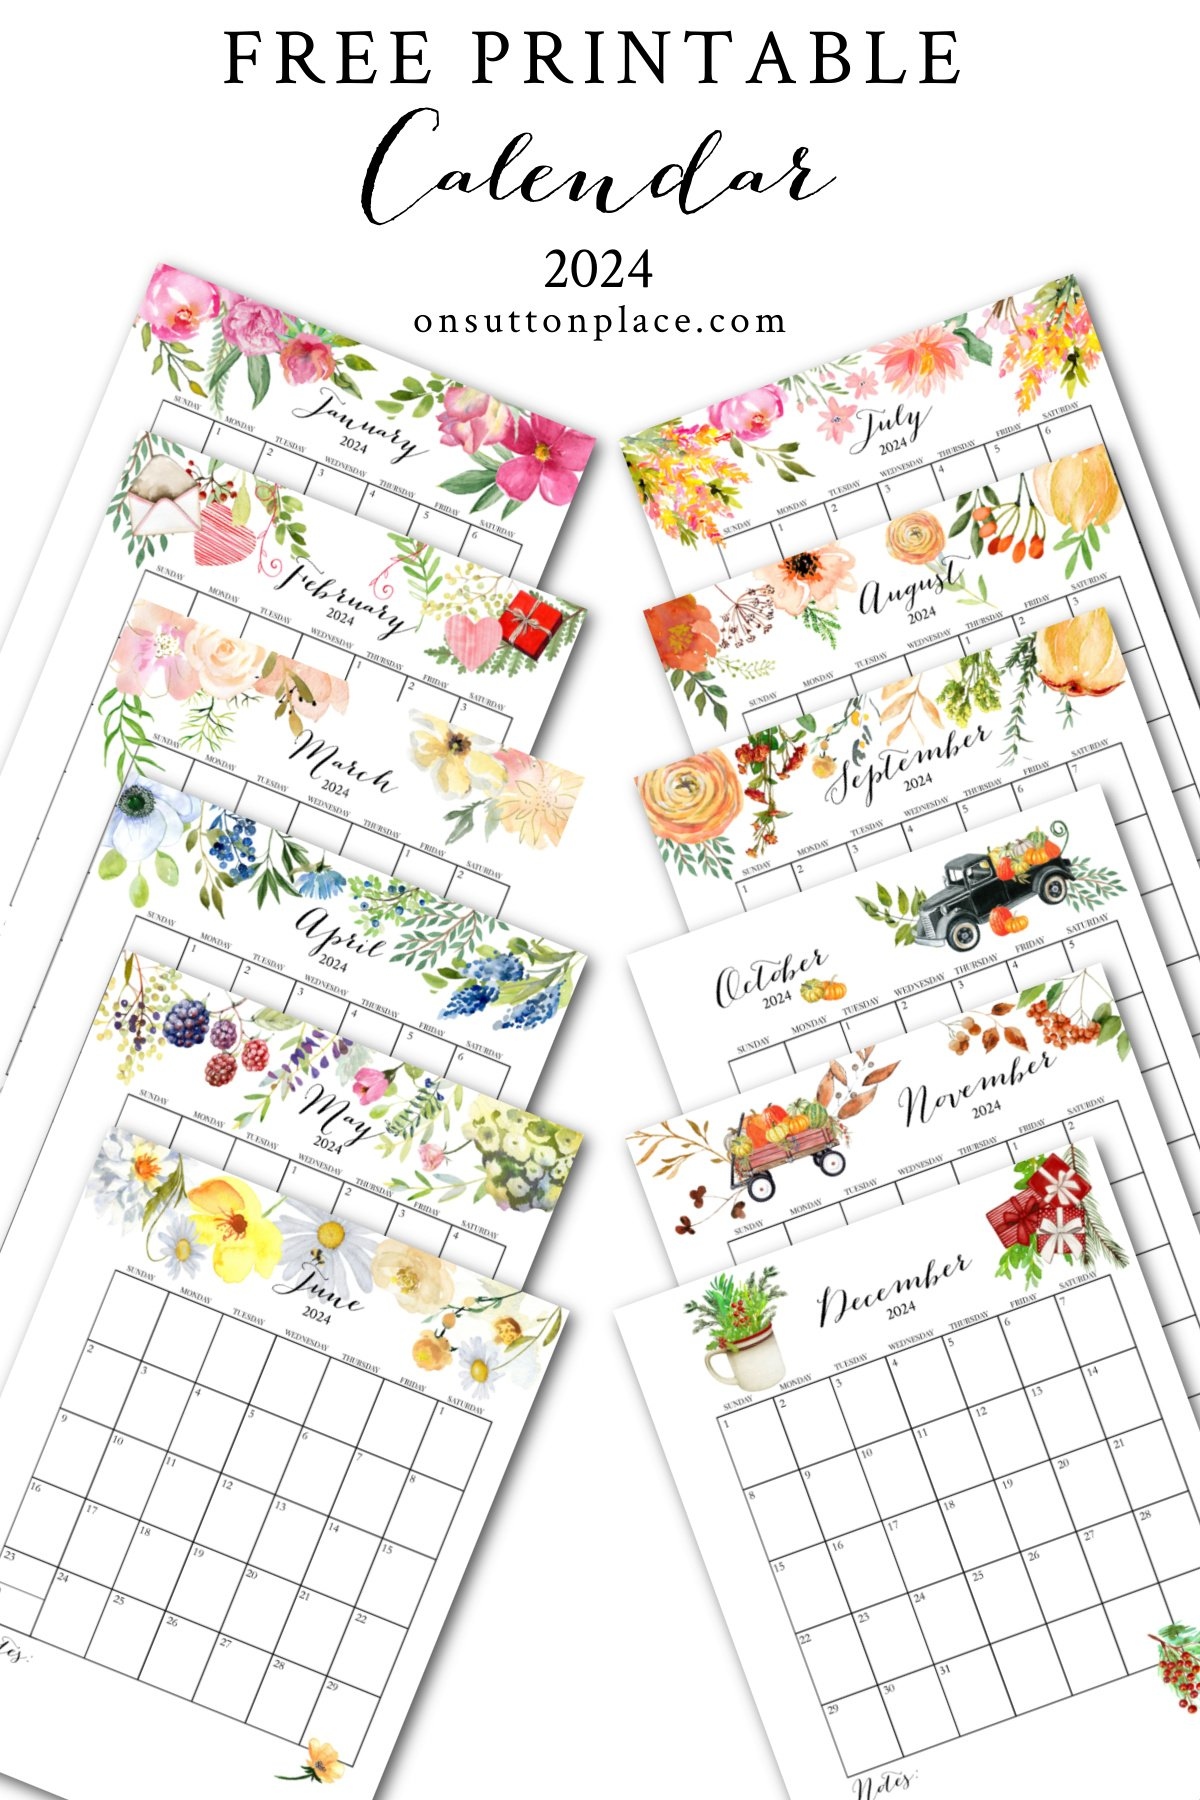 2024 Free Printable Calendar With Planner Pages - On Sutton Place with Free Printable Calendar 2024 In Designs